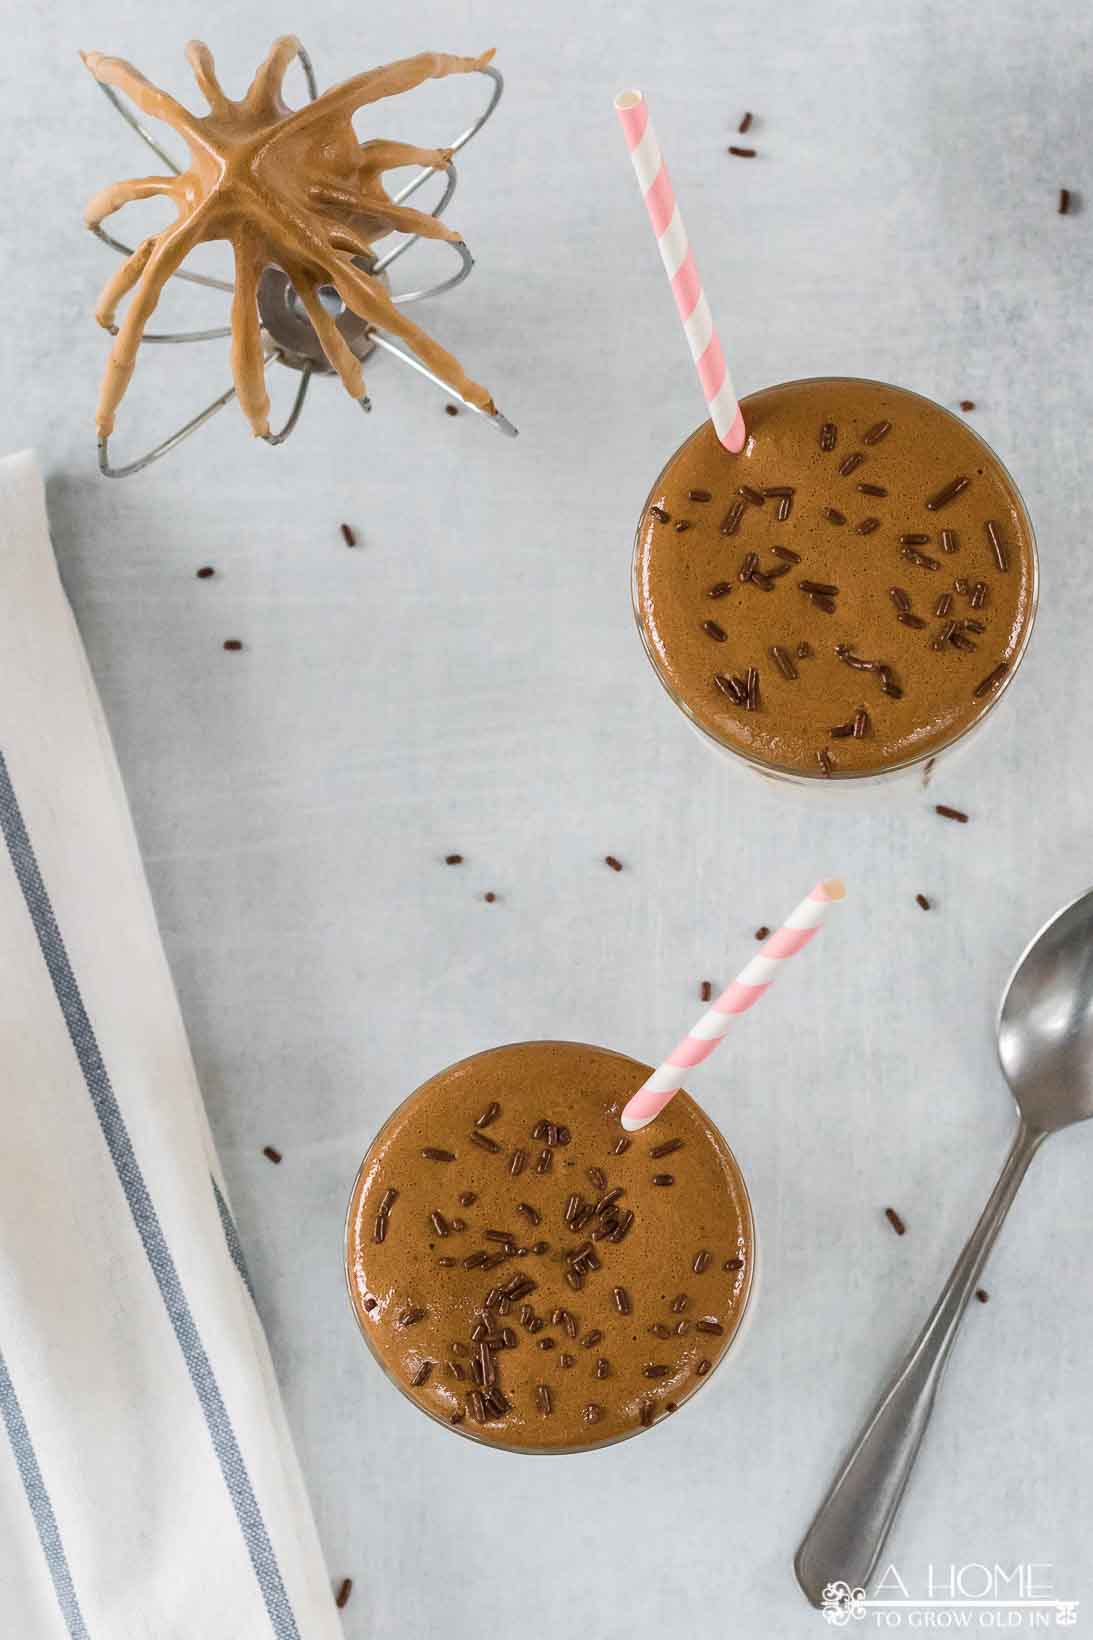 mocha dalgona whipped coffee recipe with chocolate sprinkles and a straw